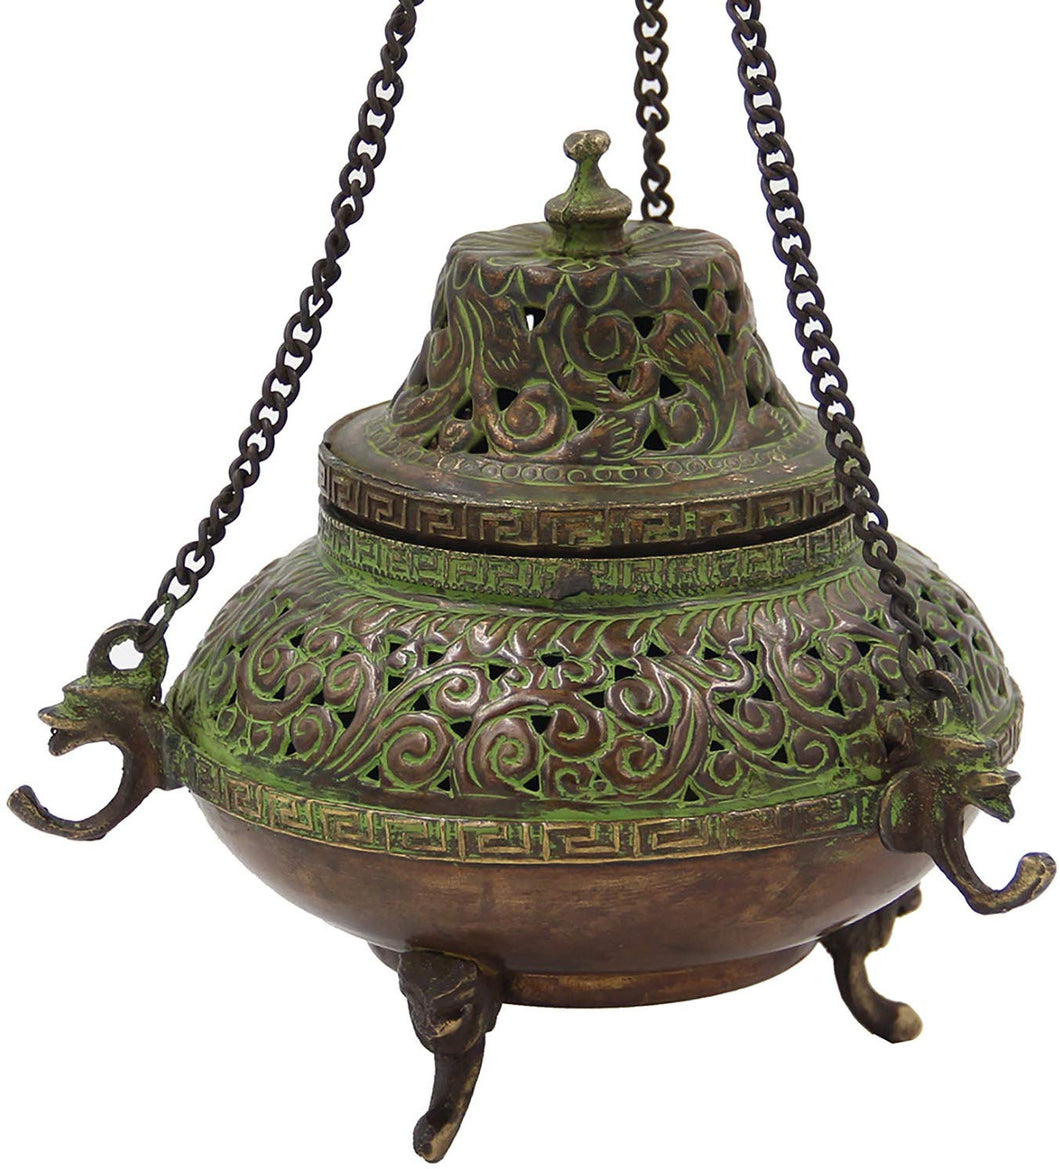 Tibetan Traditional Hanging Incense Burner Copper (5.5 x 4.5 x 4.5 Inches, Hanging 7) - DharmaObjects